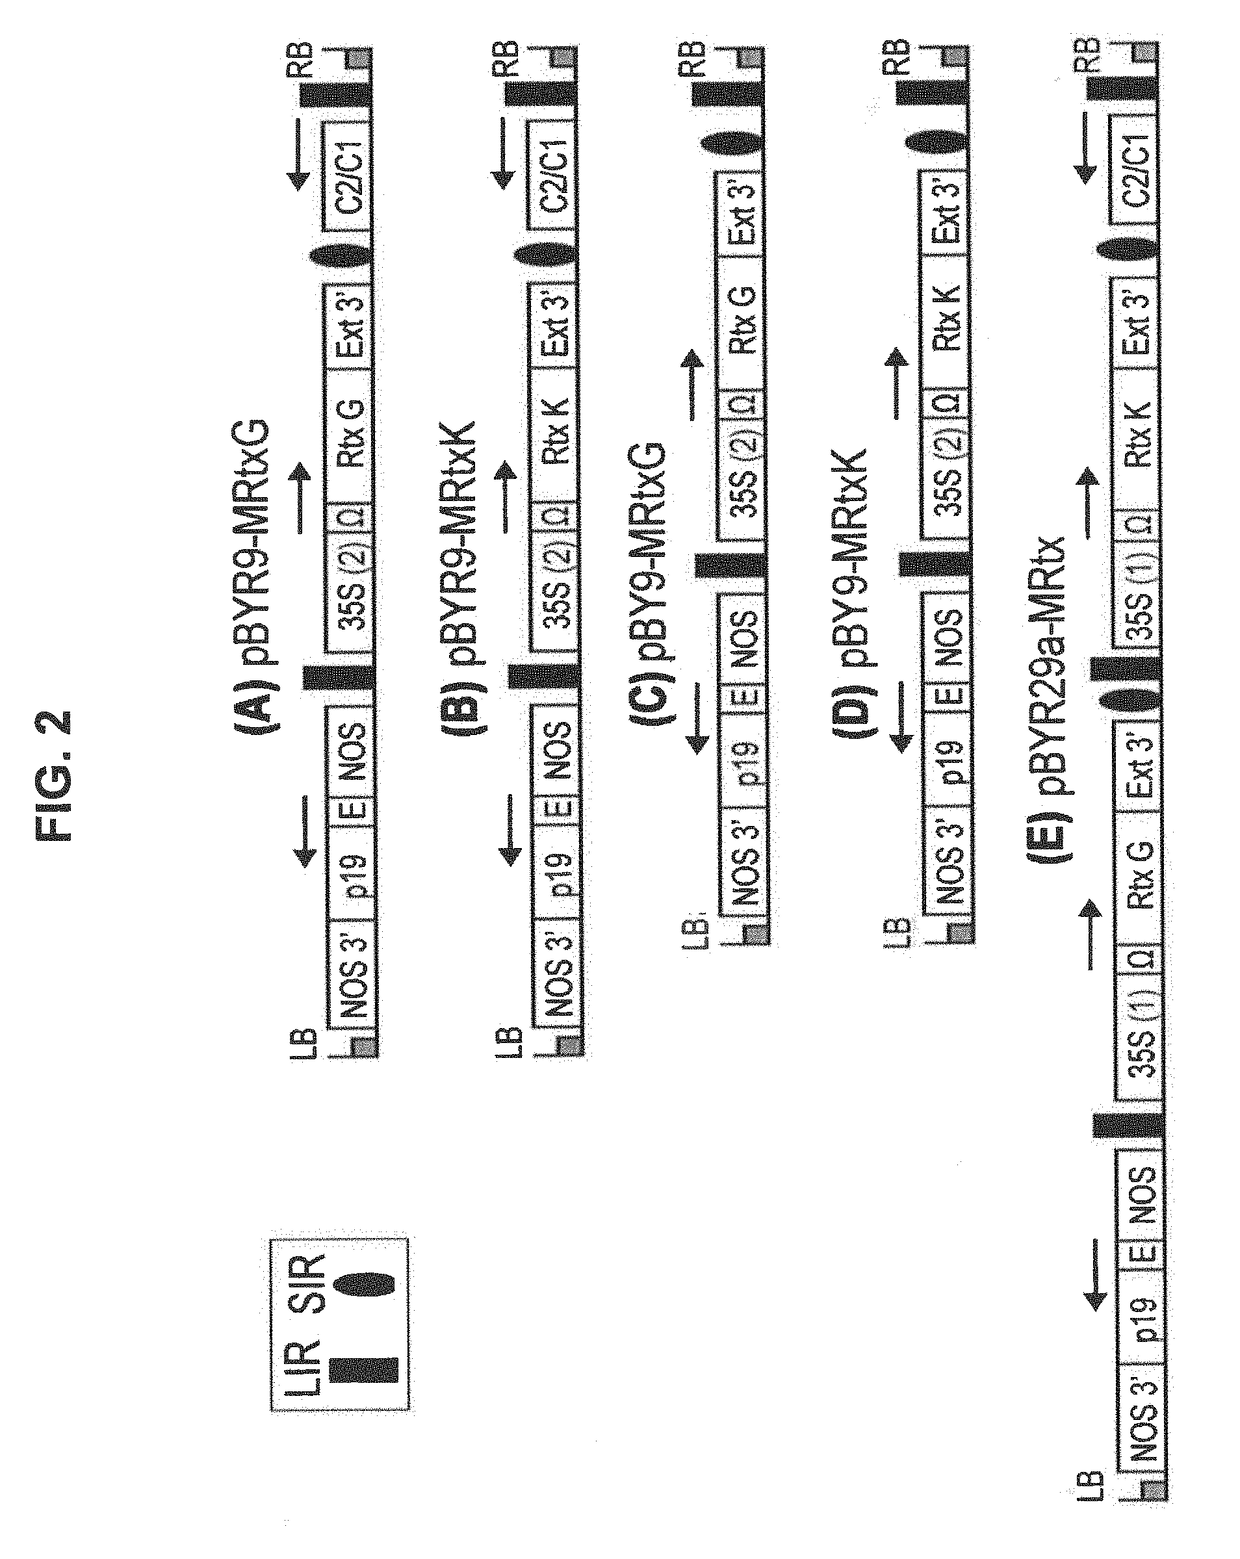 Geminiviral vector for expression of rituximab